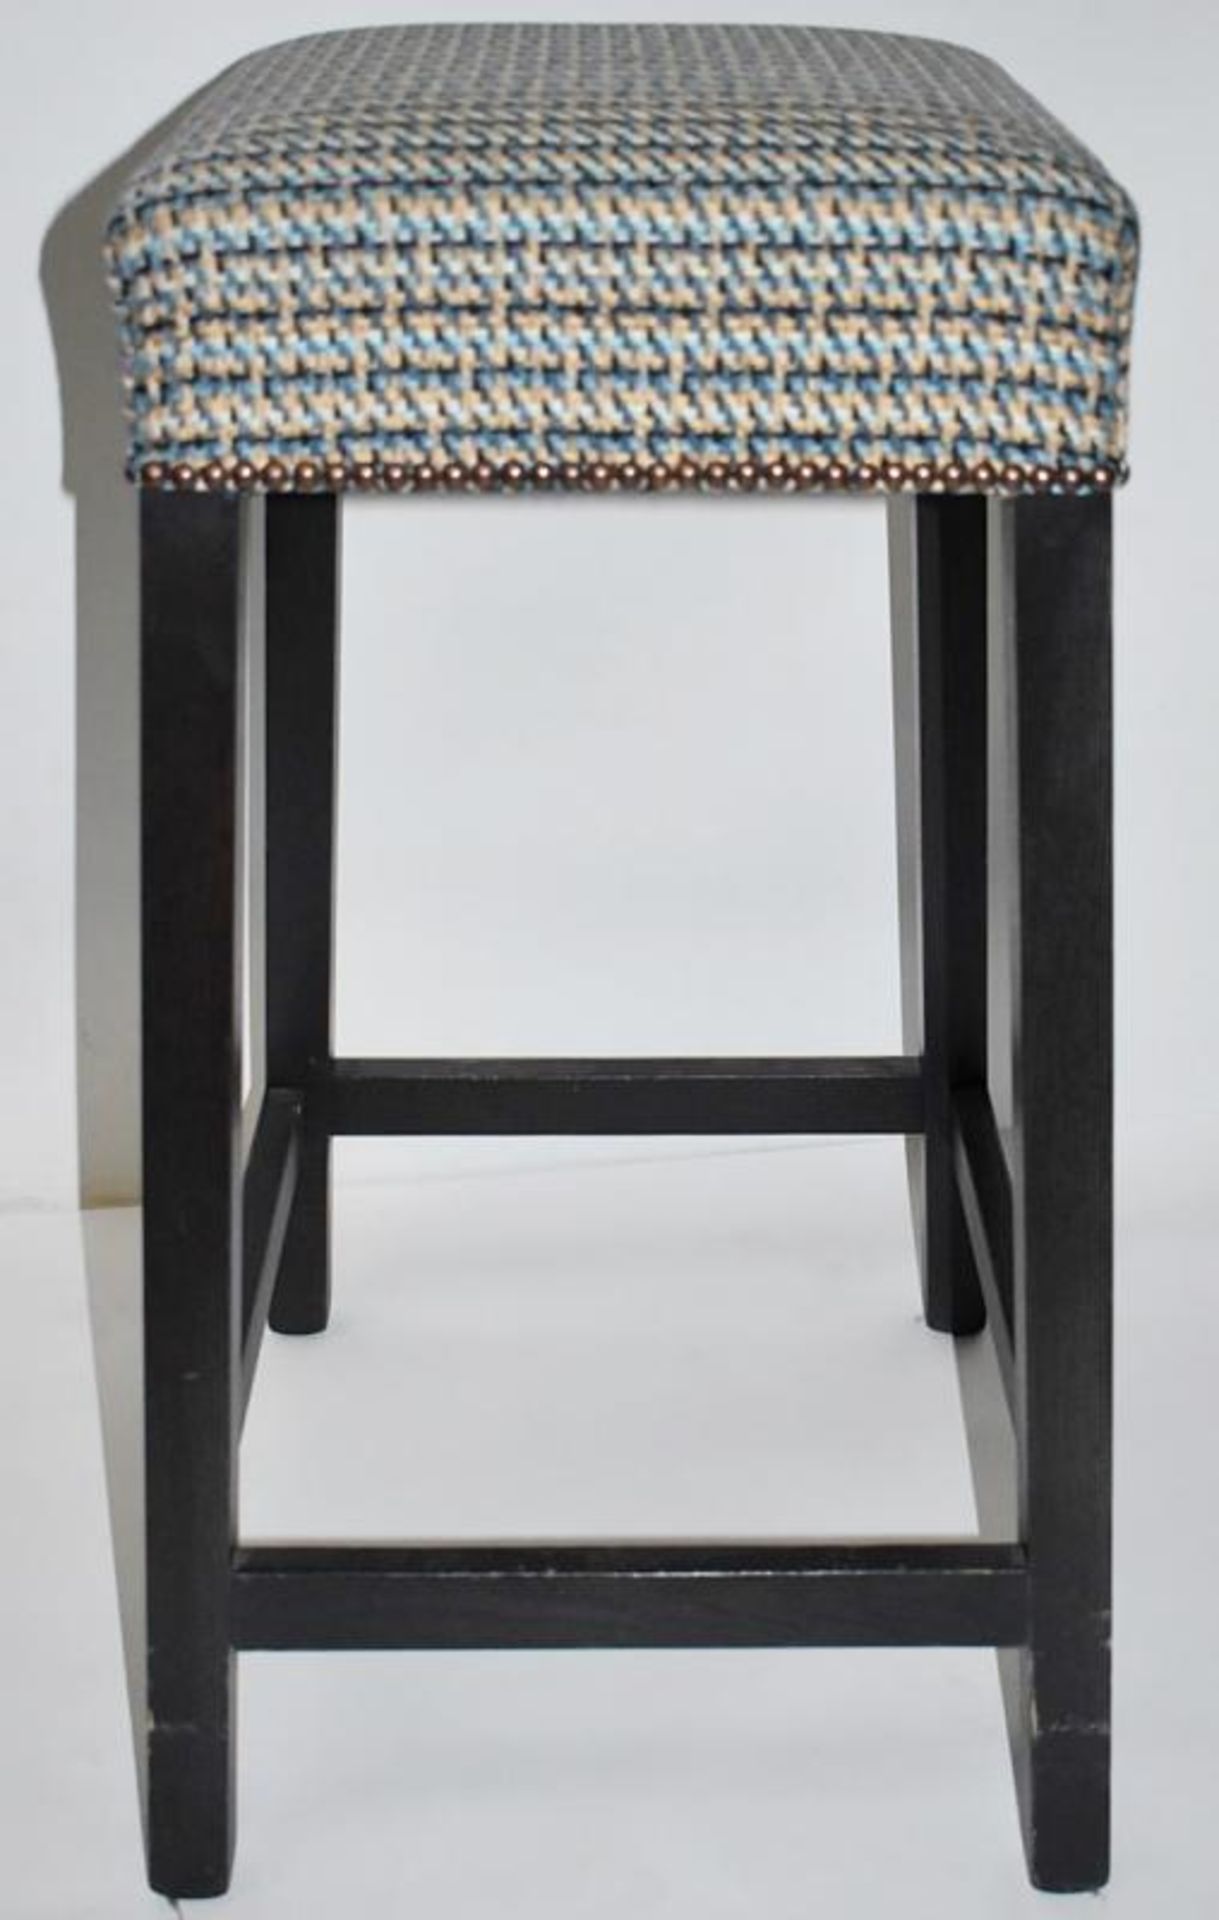 1 x Contemporary Bar Stool Upholstered In A Chic Designer Fabric - Recently Removed From A Famous De - Image 6 of 7